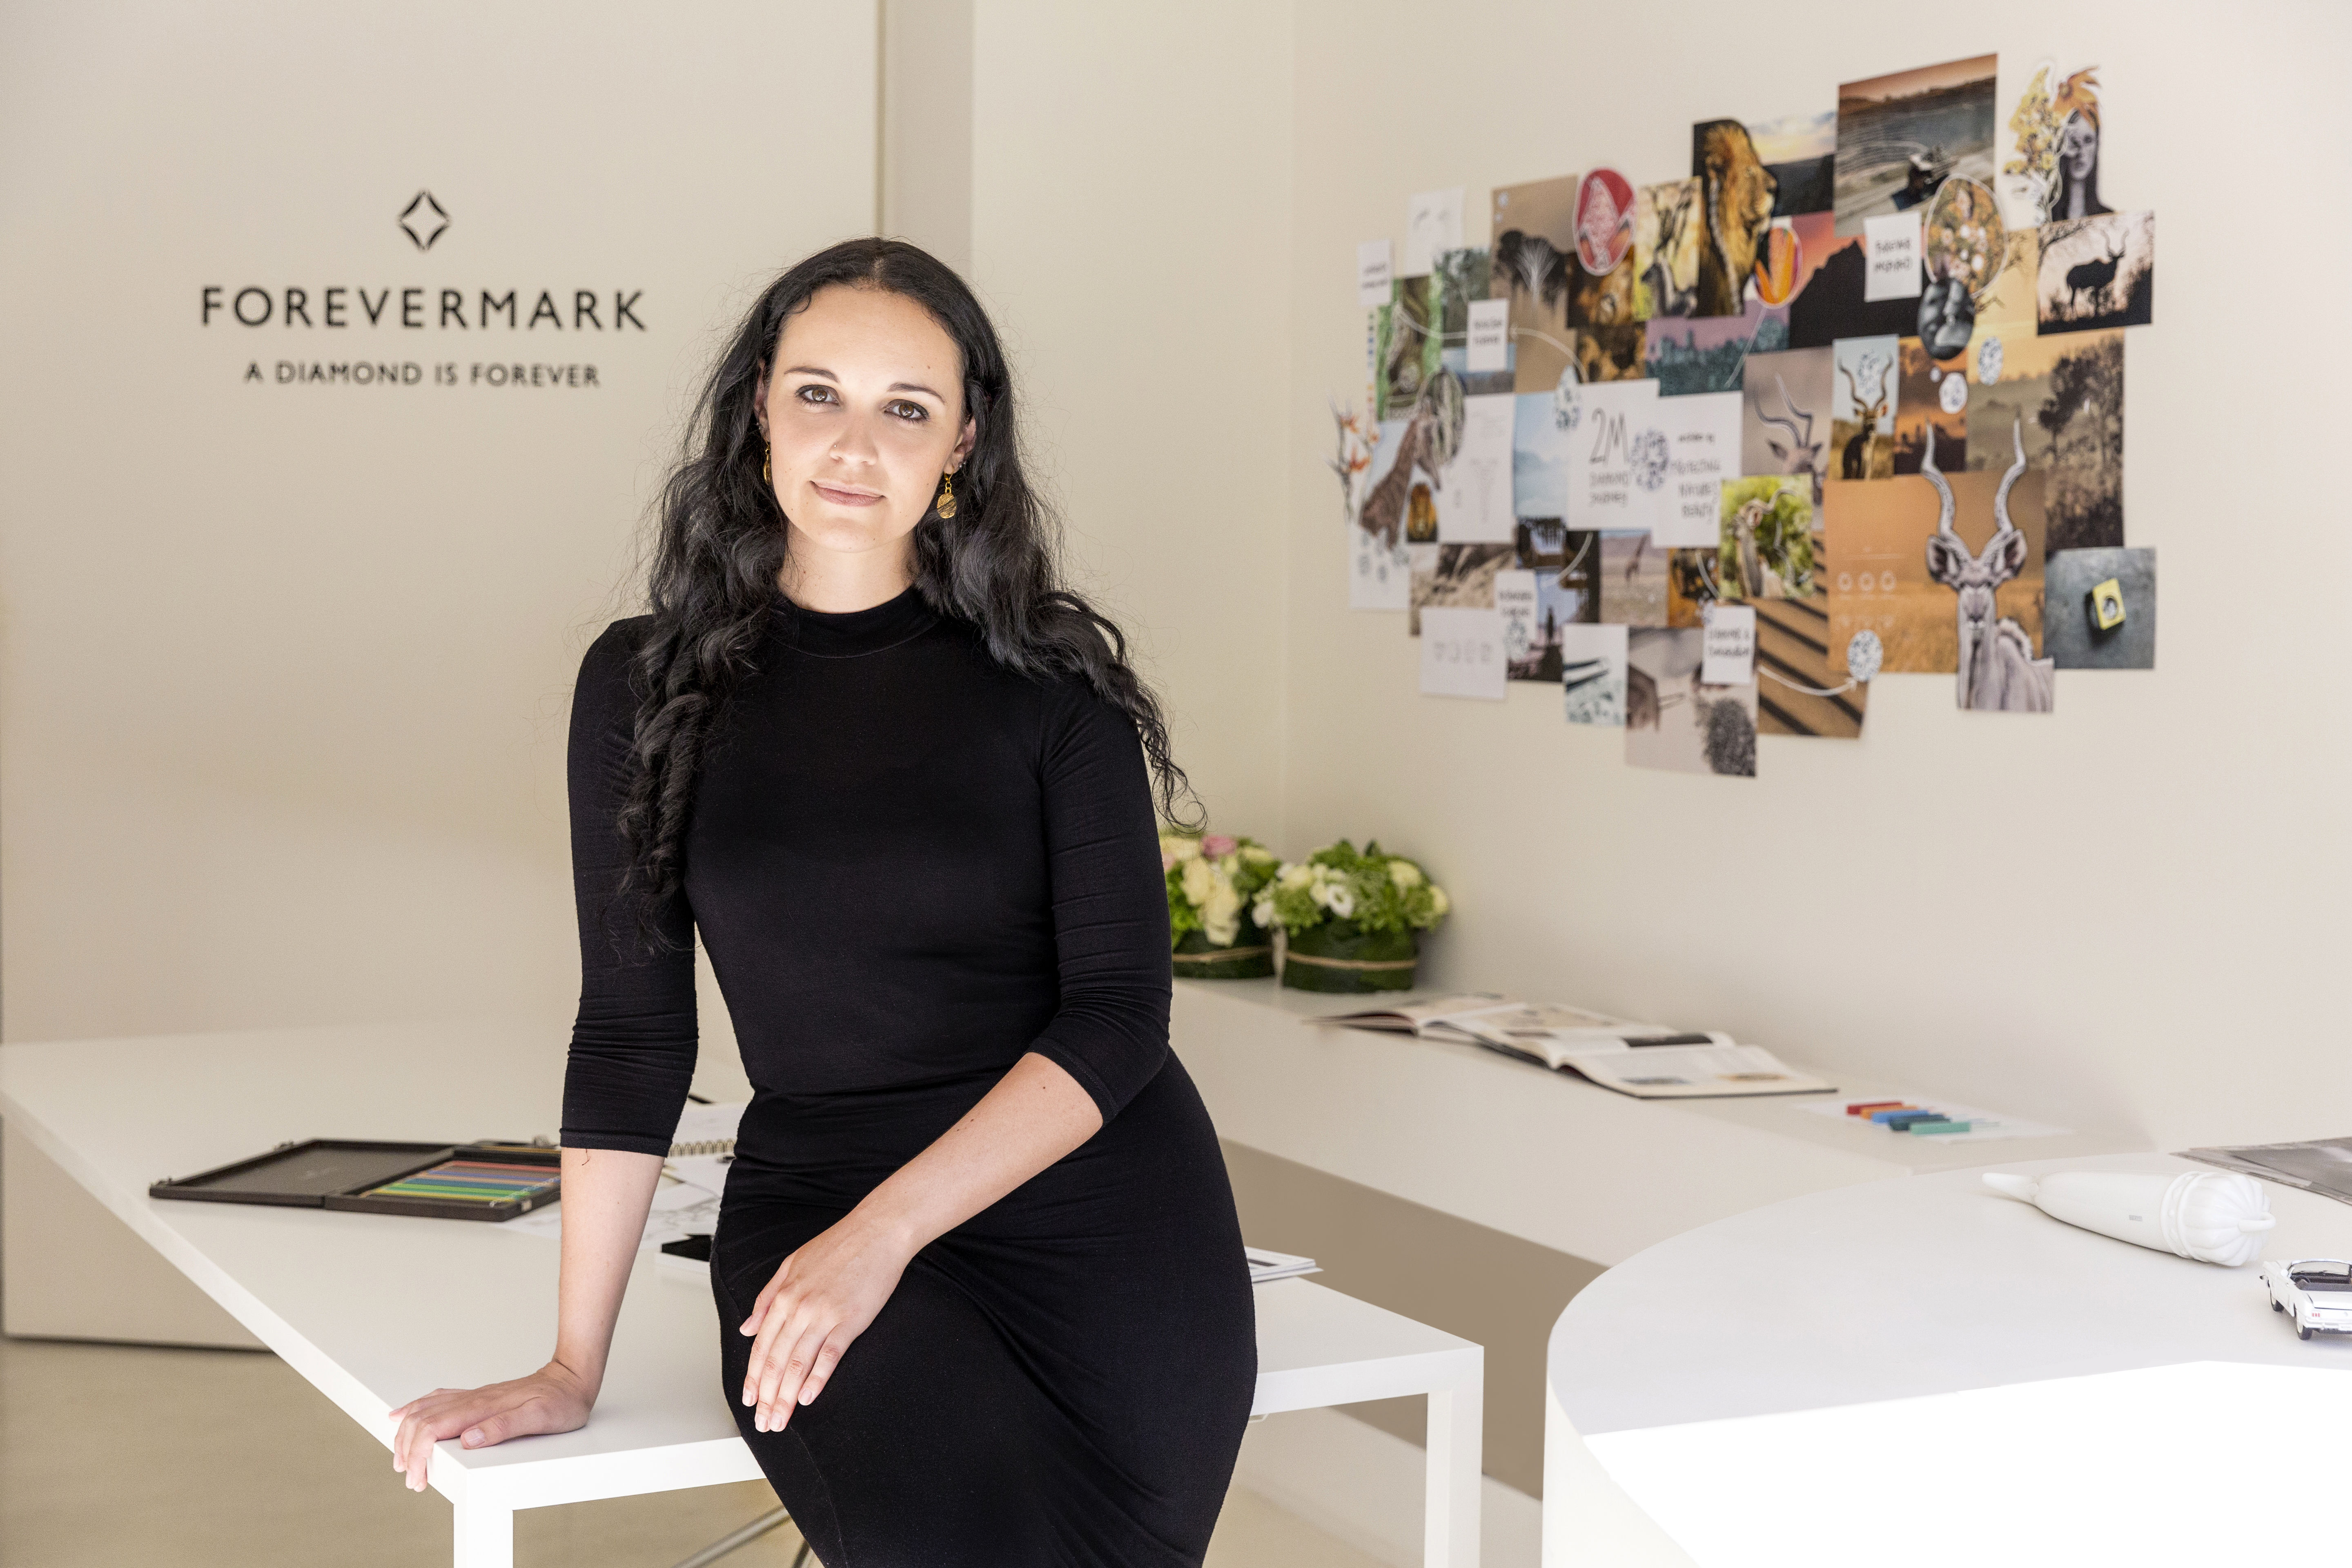 Who is the force behind Forevermark’s Force of Nature?